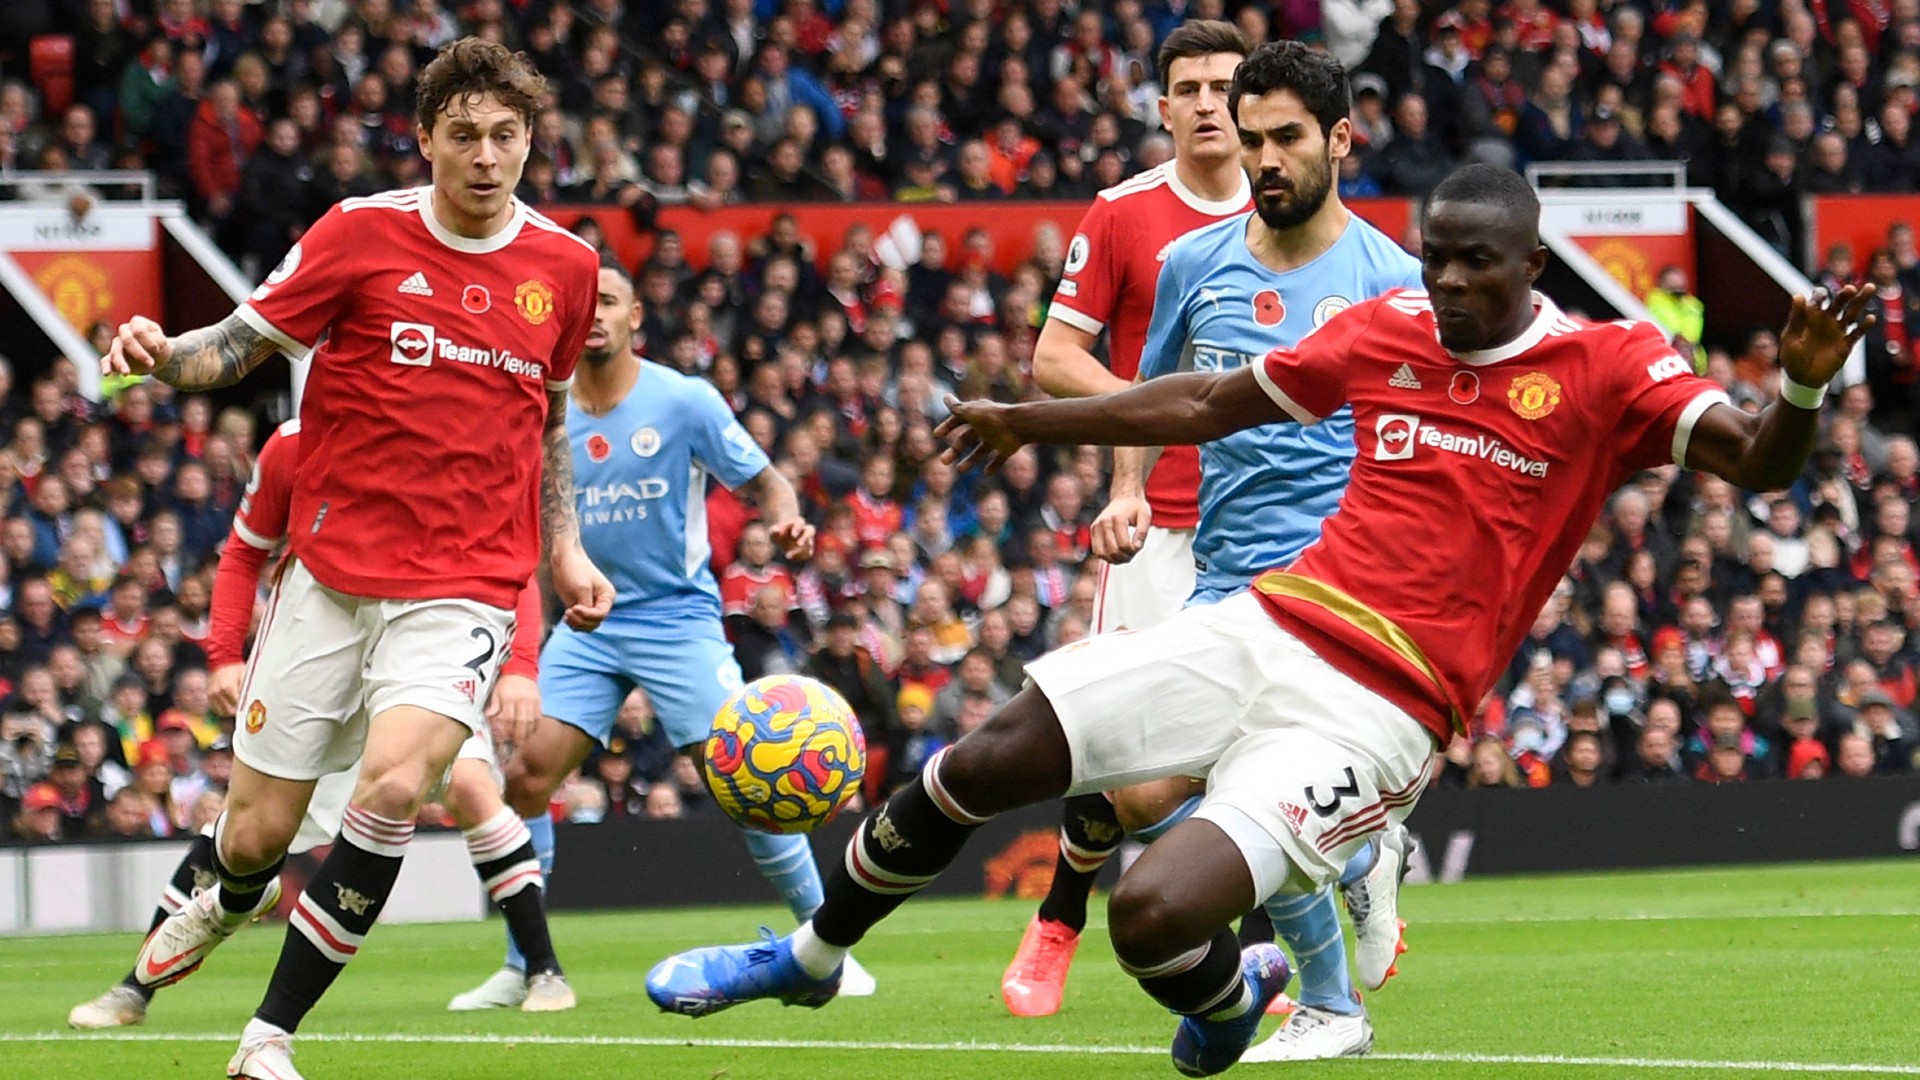 Sinclair and McClaren slam Manchester United defender Bailly for his 'mistakes'